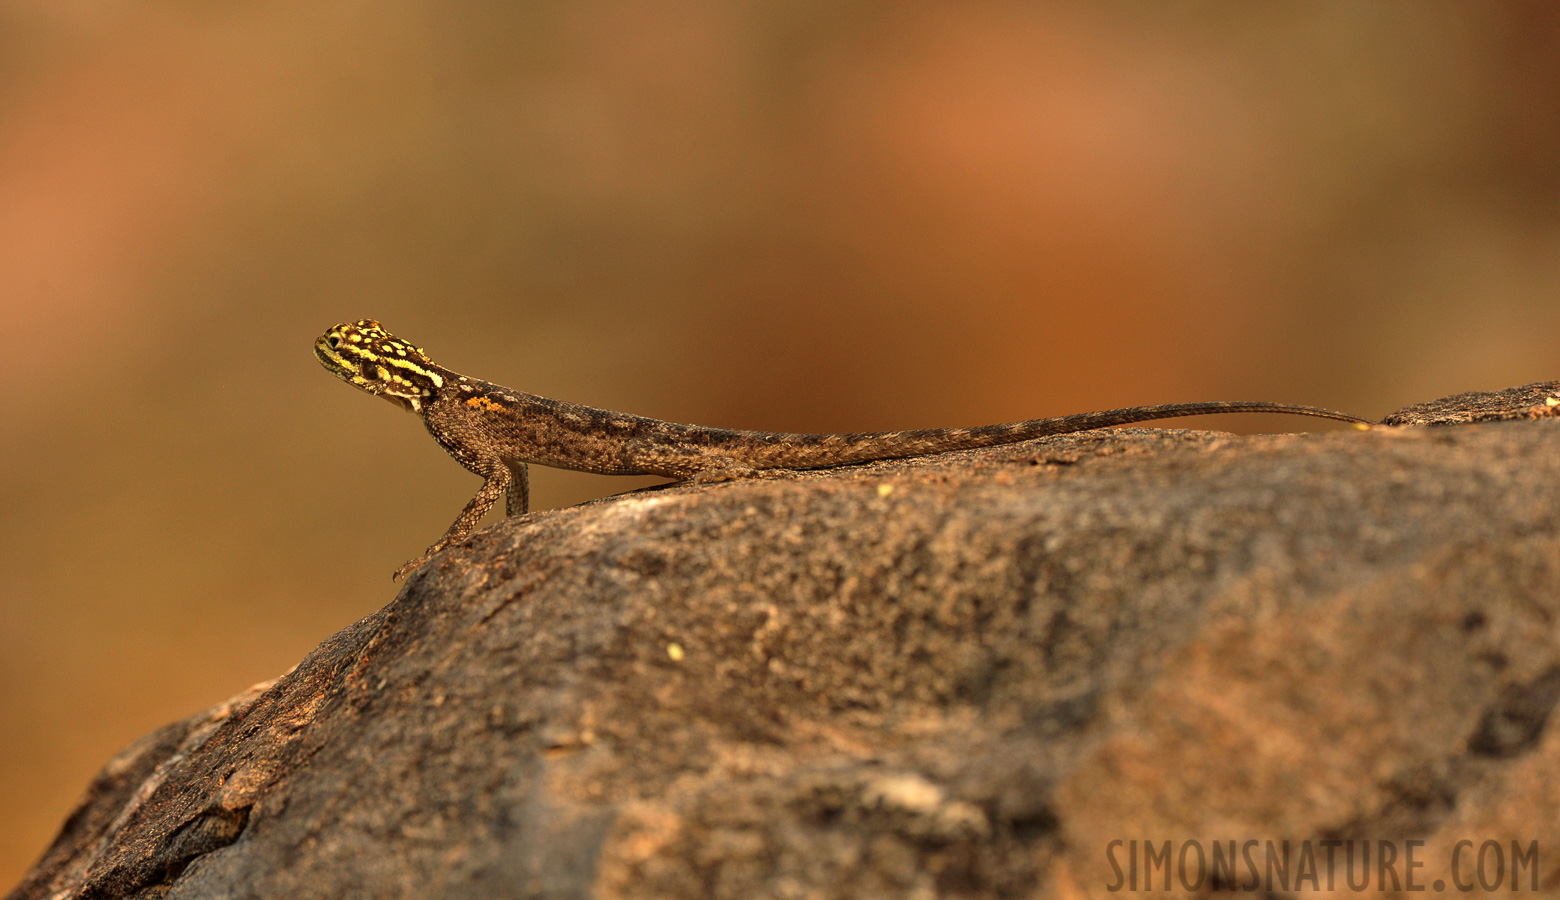 Agama planiceps [400 mm, 1/320 sec at f / 8.0, ISO 1600]